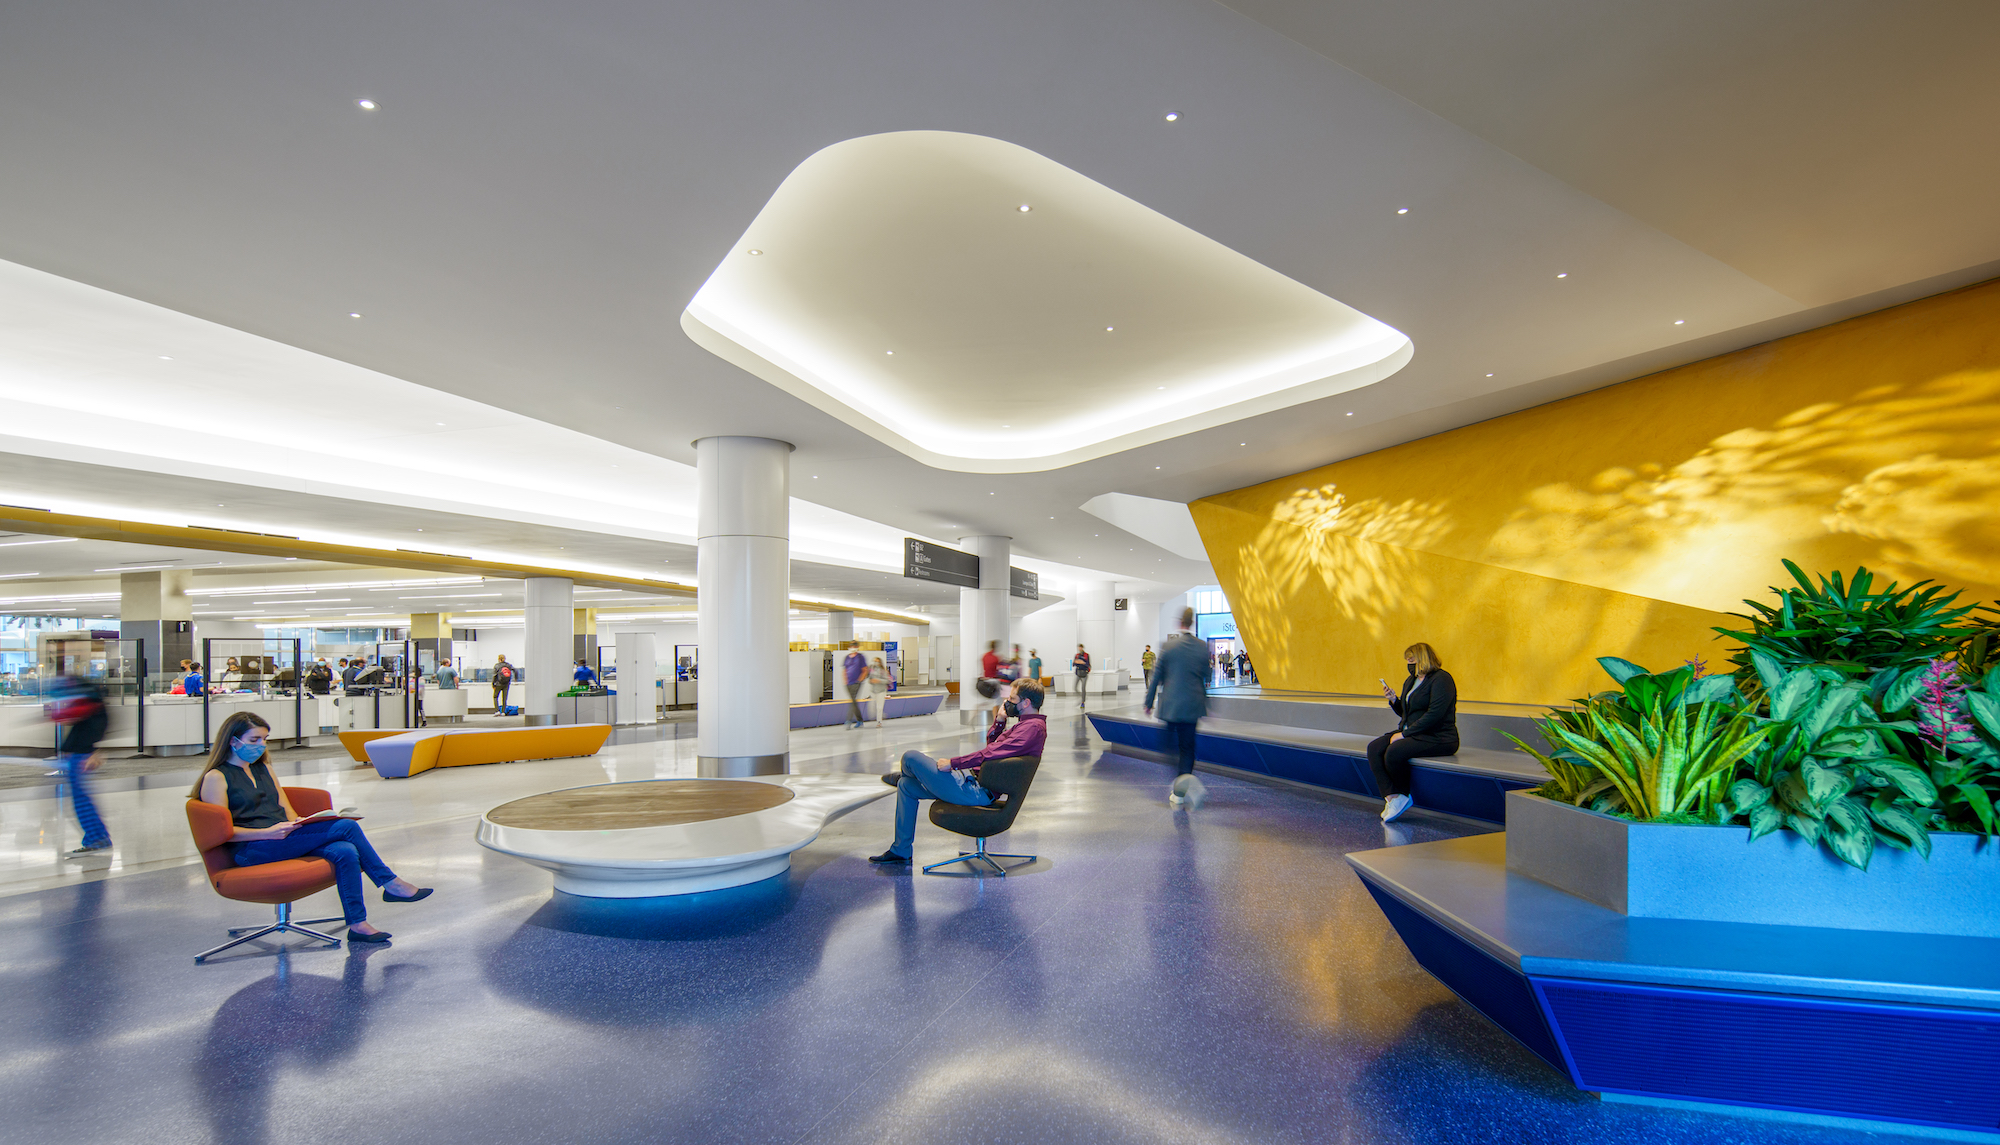 Top 55 Airport Terminal Architecture Firms for 2022 San Francisco International Airport (SFO), T1 Expansion Jason O’Rear Photography, courtesy Gensler